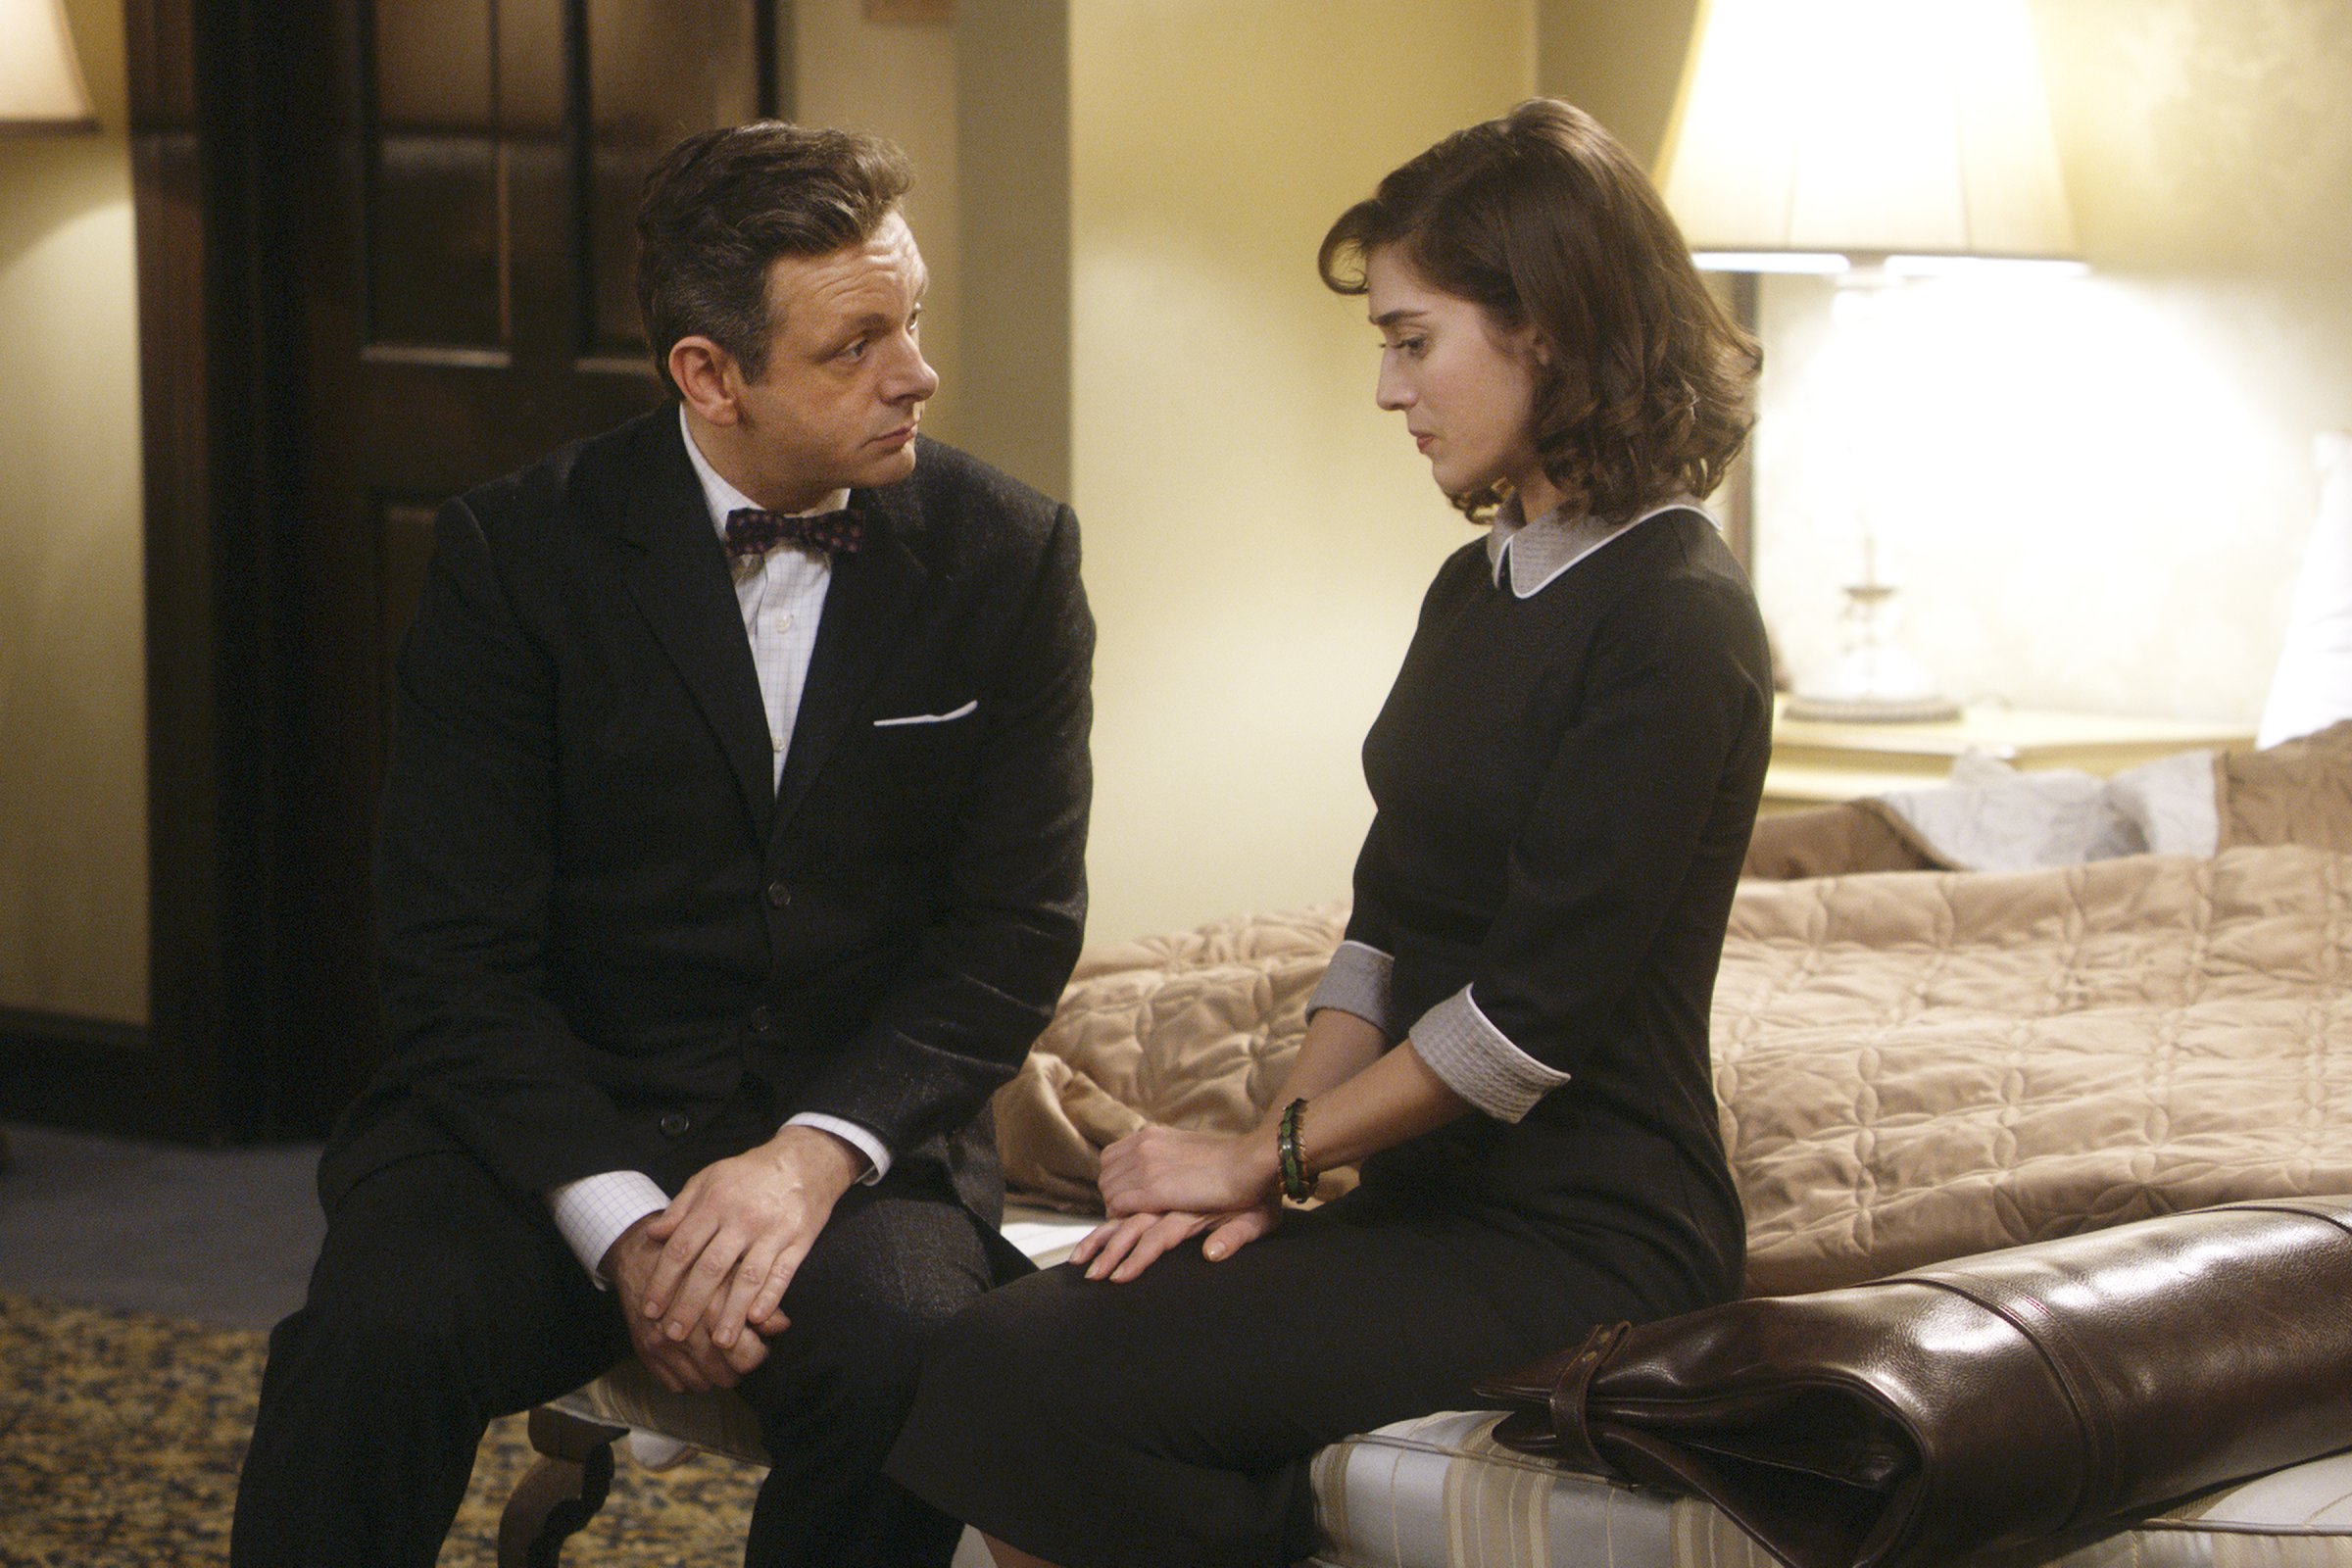 Michael Sheen as Dr. William Masters and Lizzy Caplan as Virginia Johnson in Masters of Sex (season 2, episode 3)